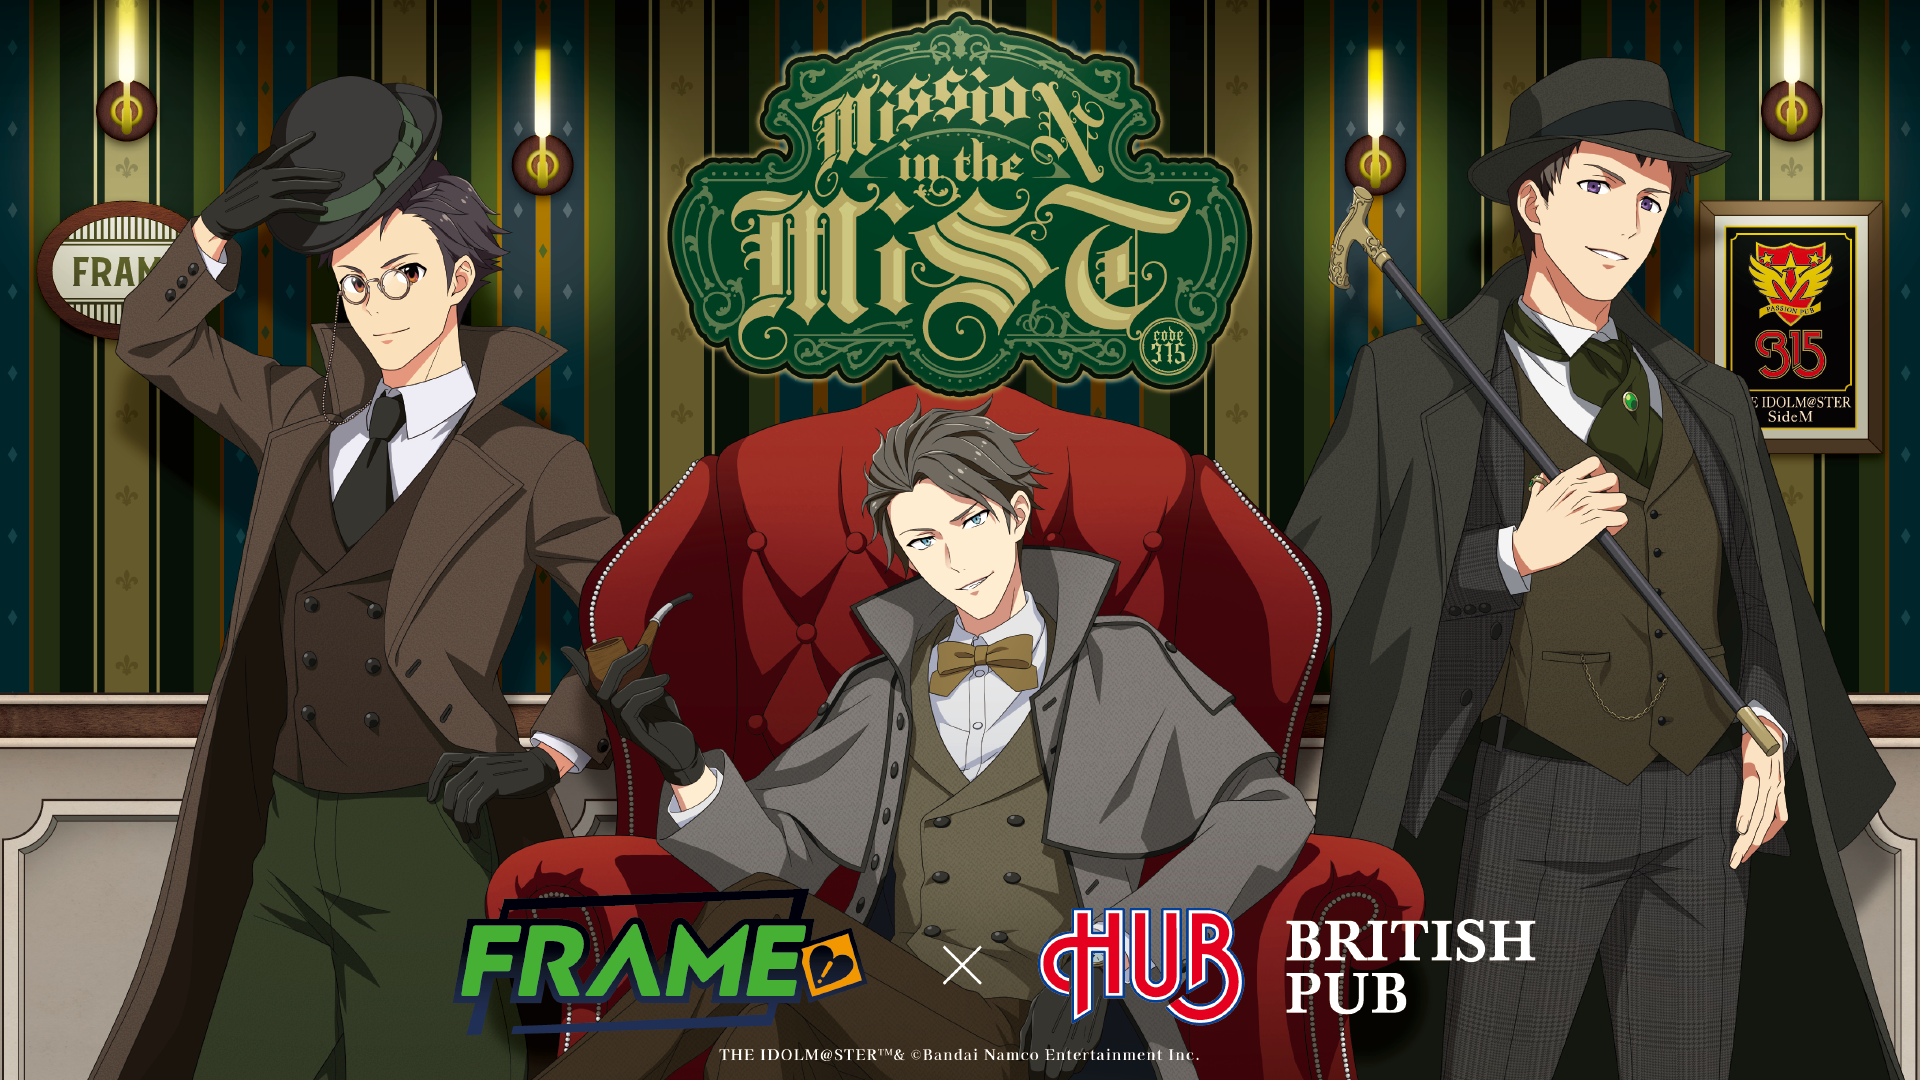 【THE IDOLM@STER SideM】-mission in the mist- FRAME × HUB コラボキャンペーン